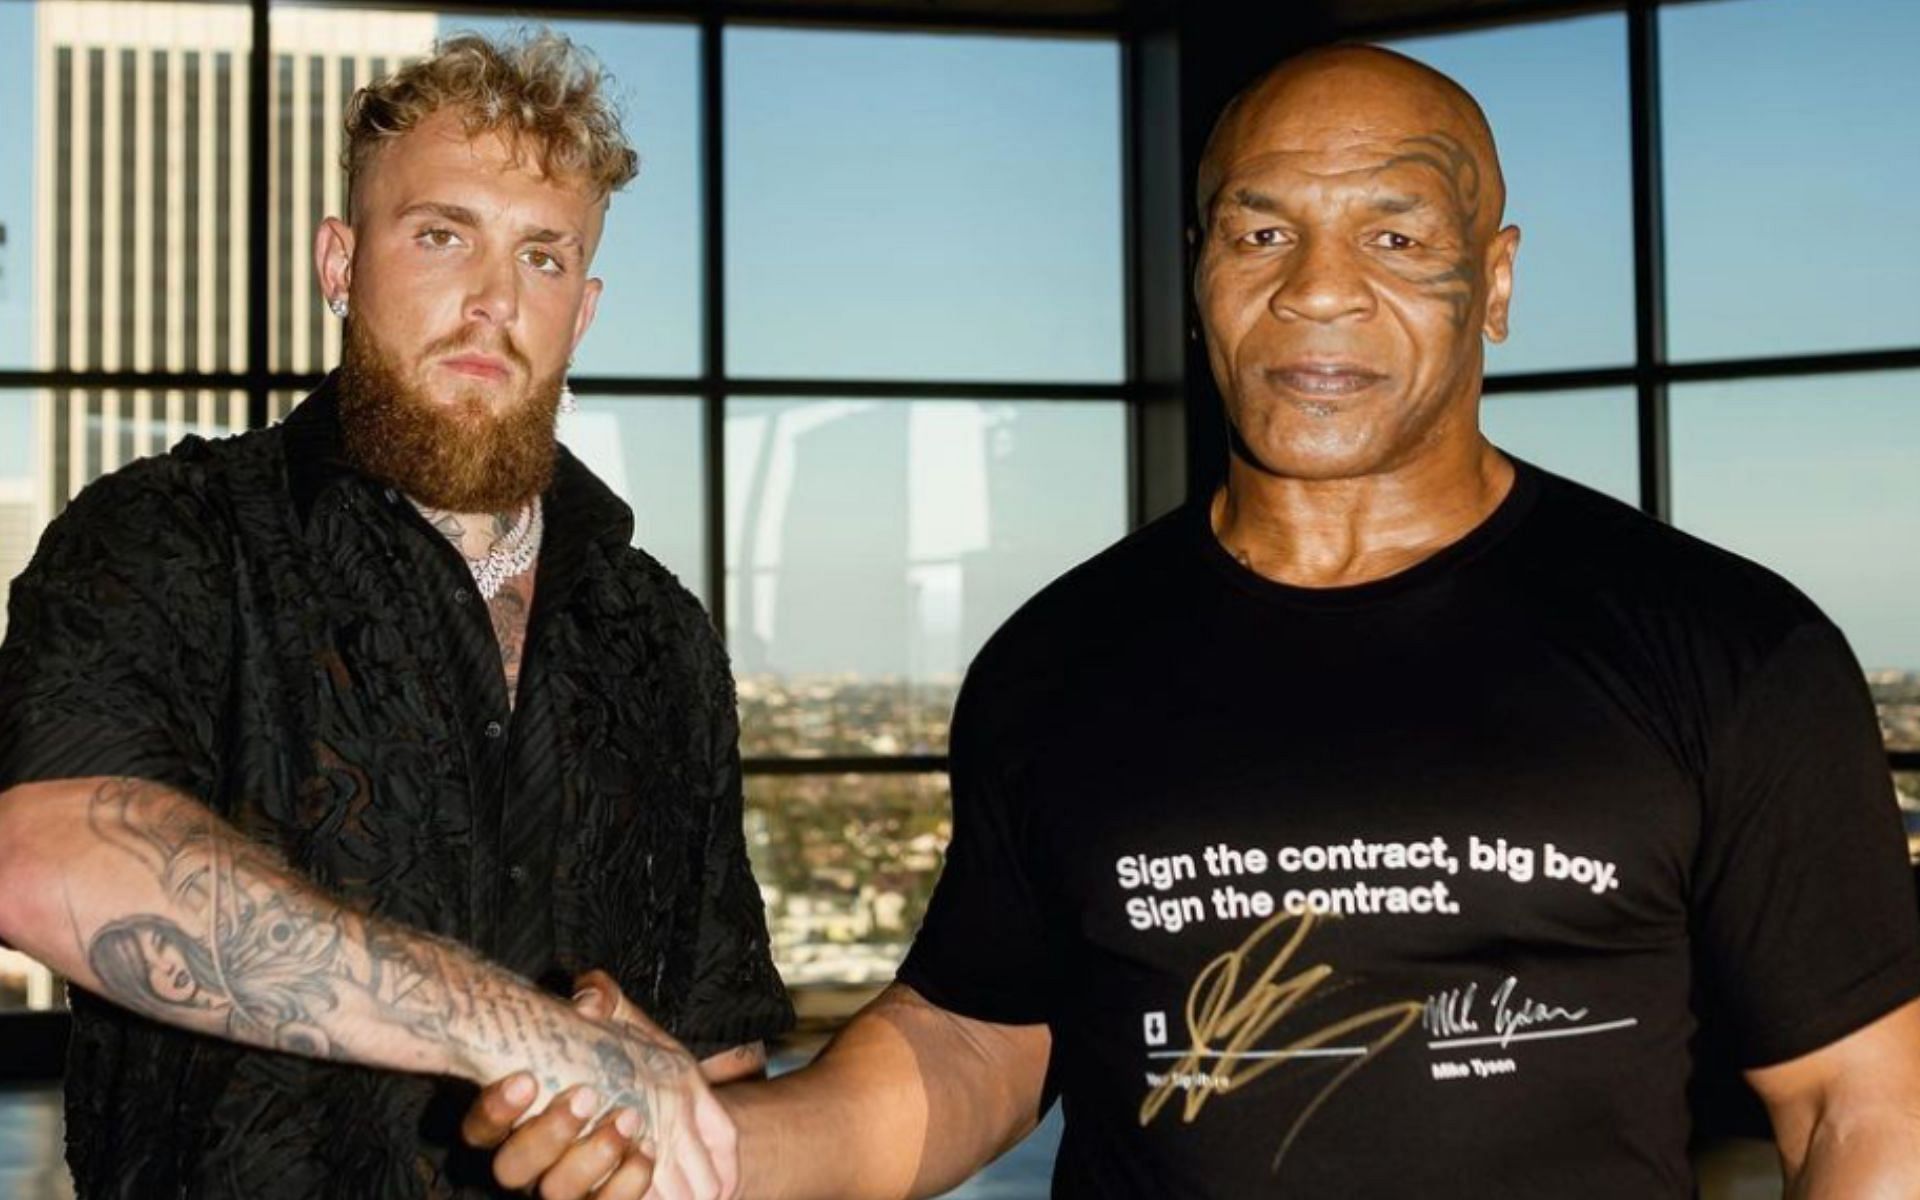 Jake Paul (left) sends a message to Mike Tyson (right) ahead of July 20 bout [Photo Courtesy @jakepaul on Instagram]